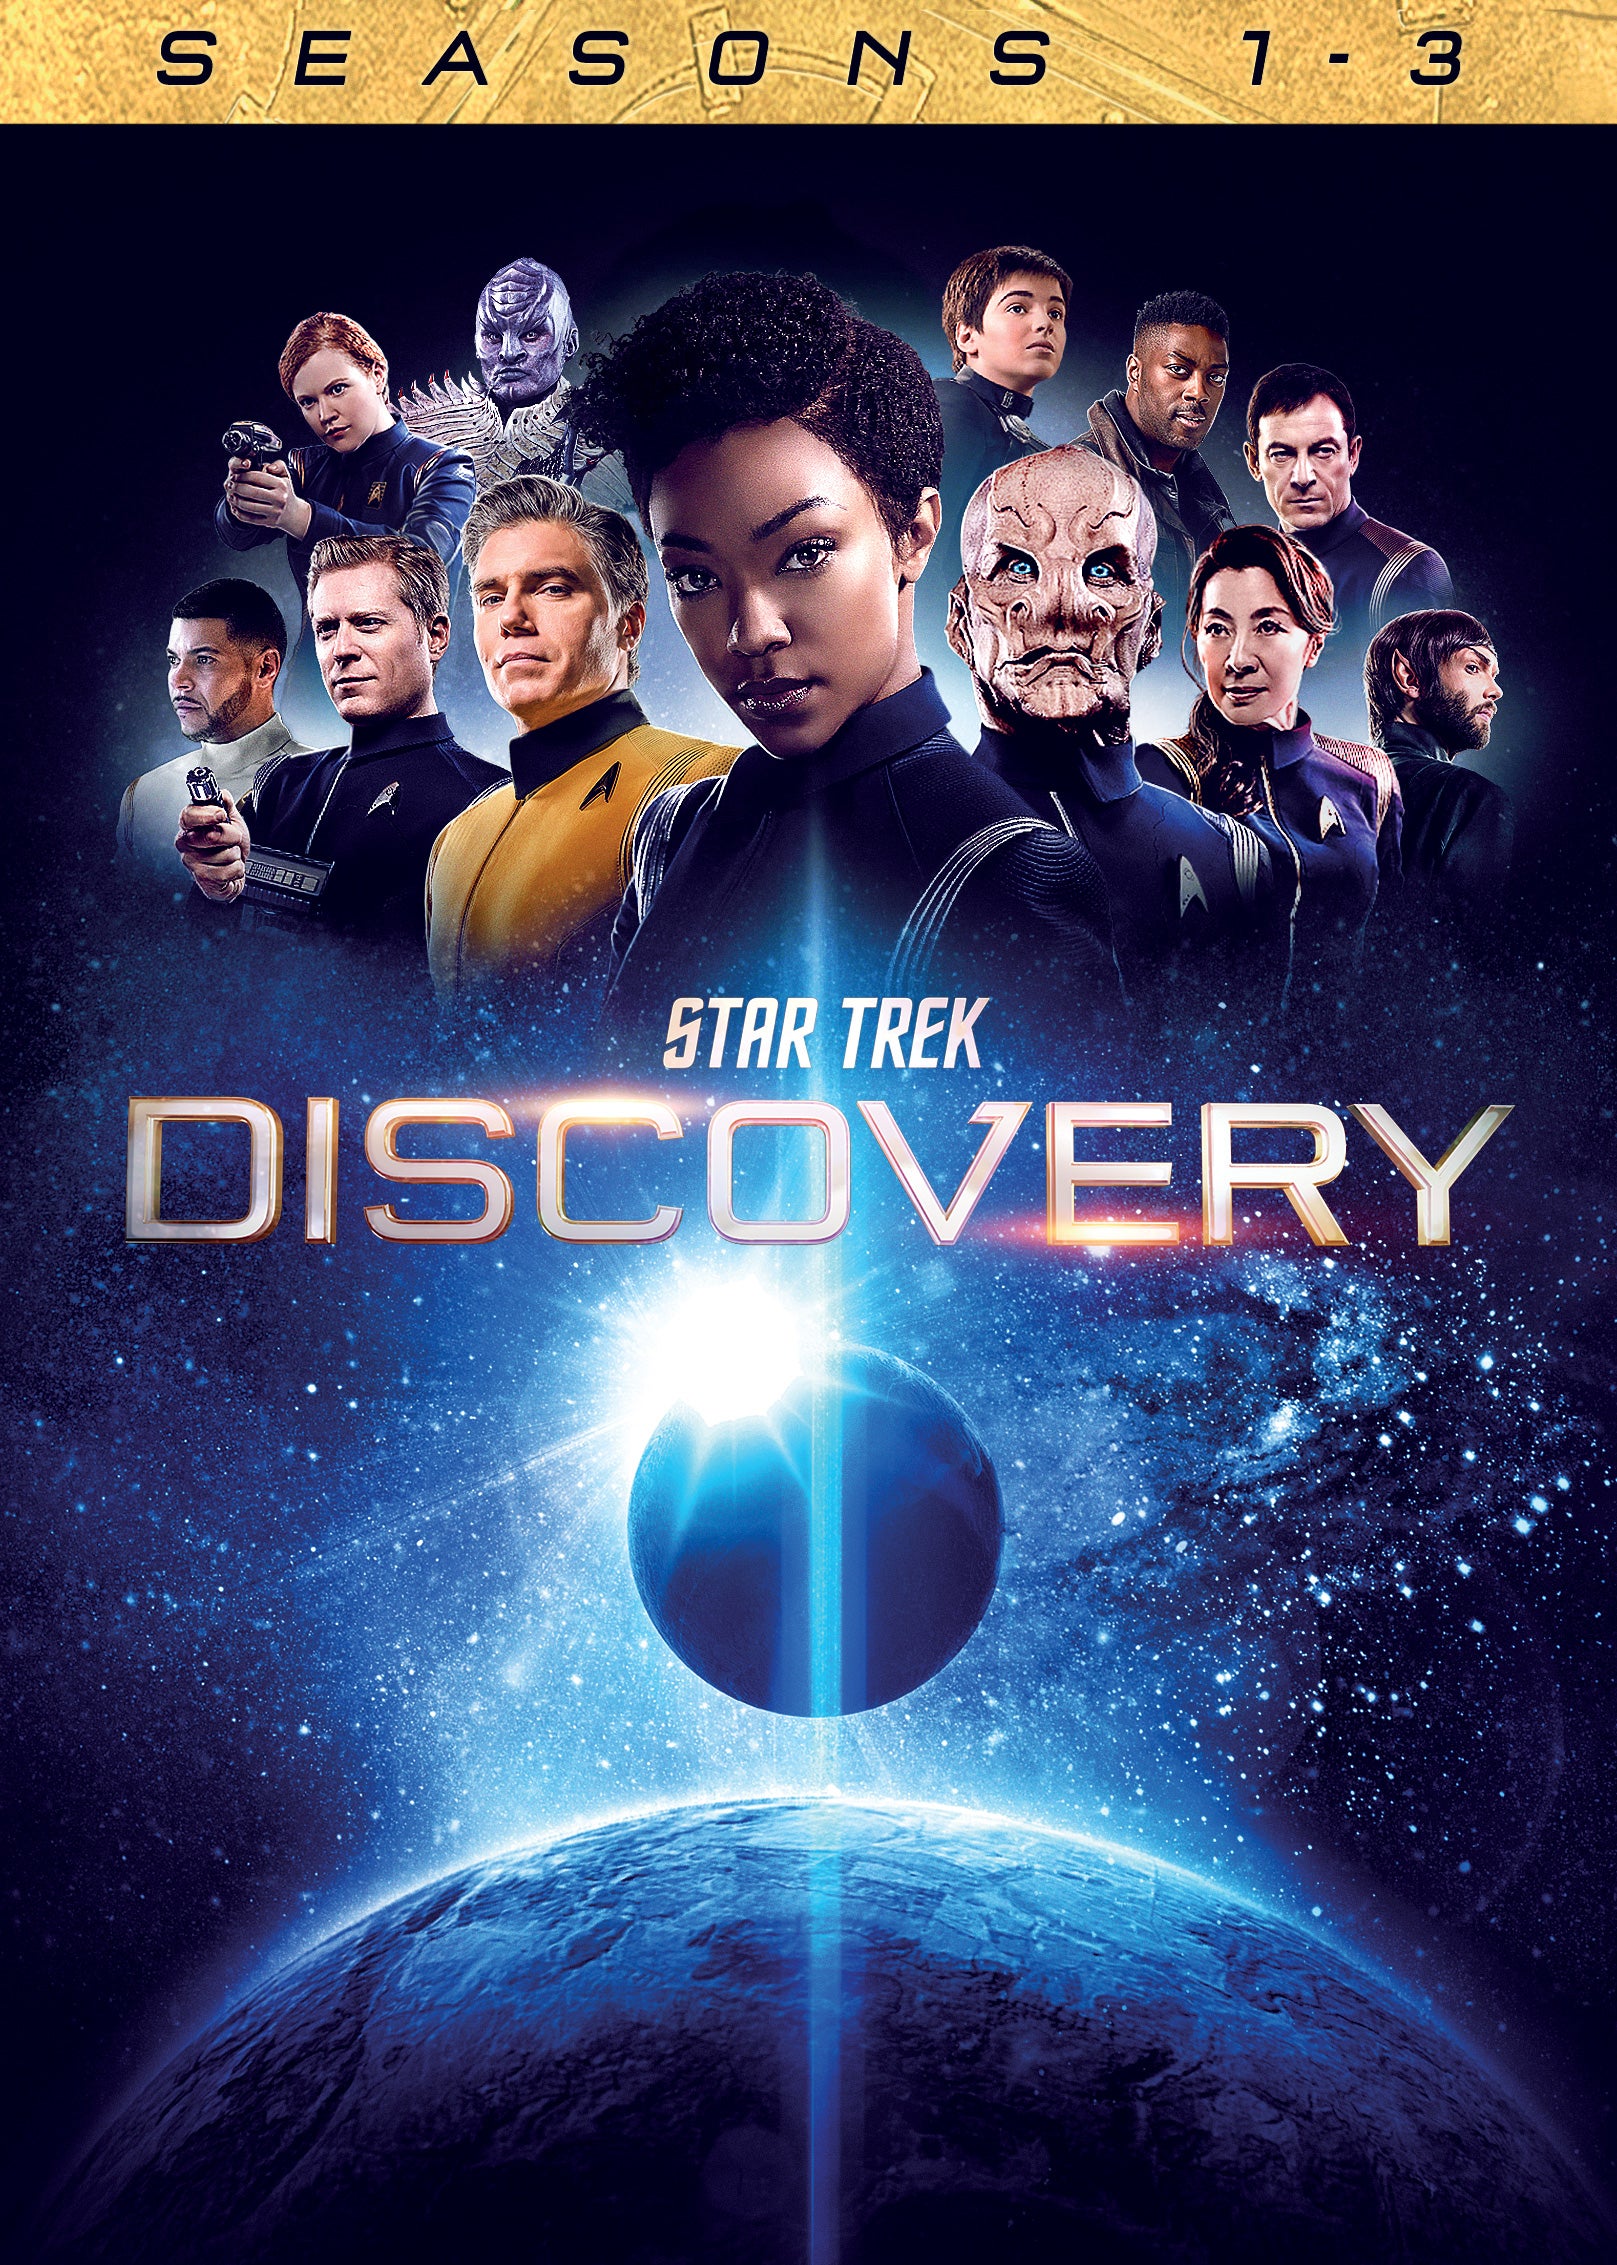 Star Trek: Discovery Seasons 1-3 Collection Arrives on Blu-ray and DVD This  November | Star Trek